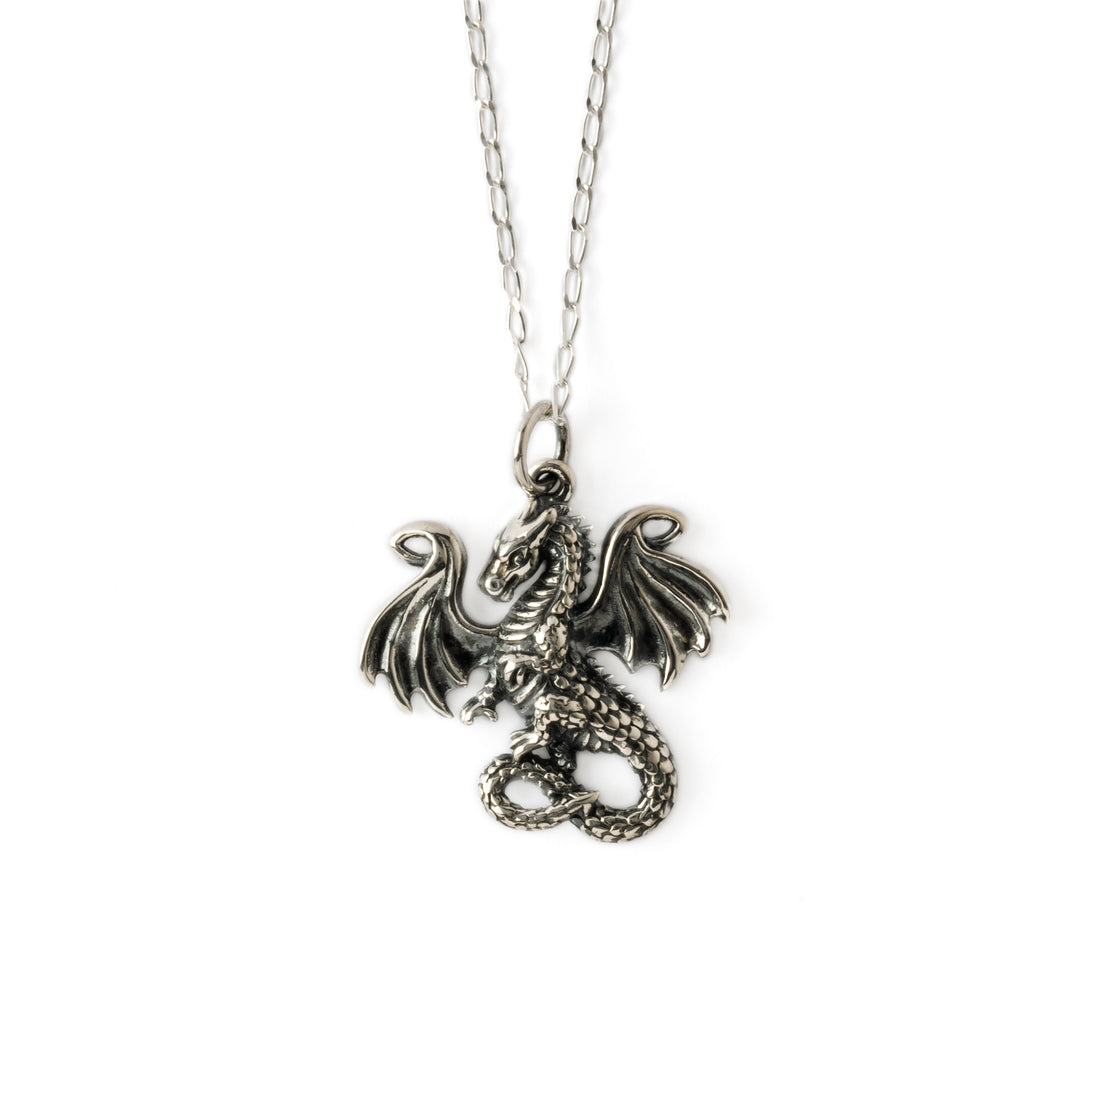 Dragon tale silver charm necklace frontal view